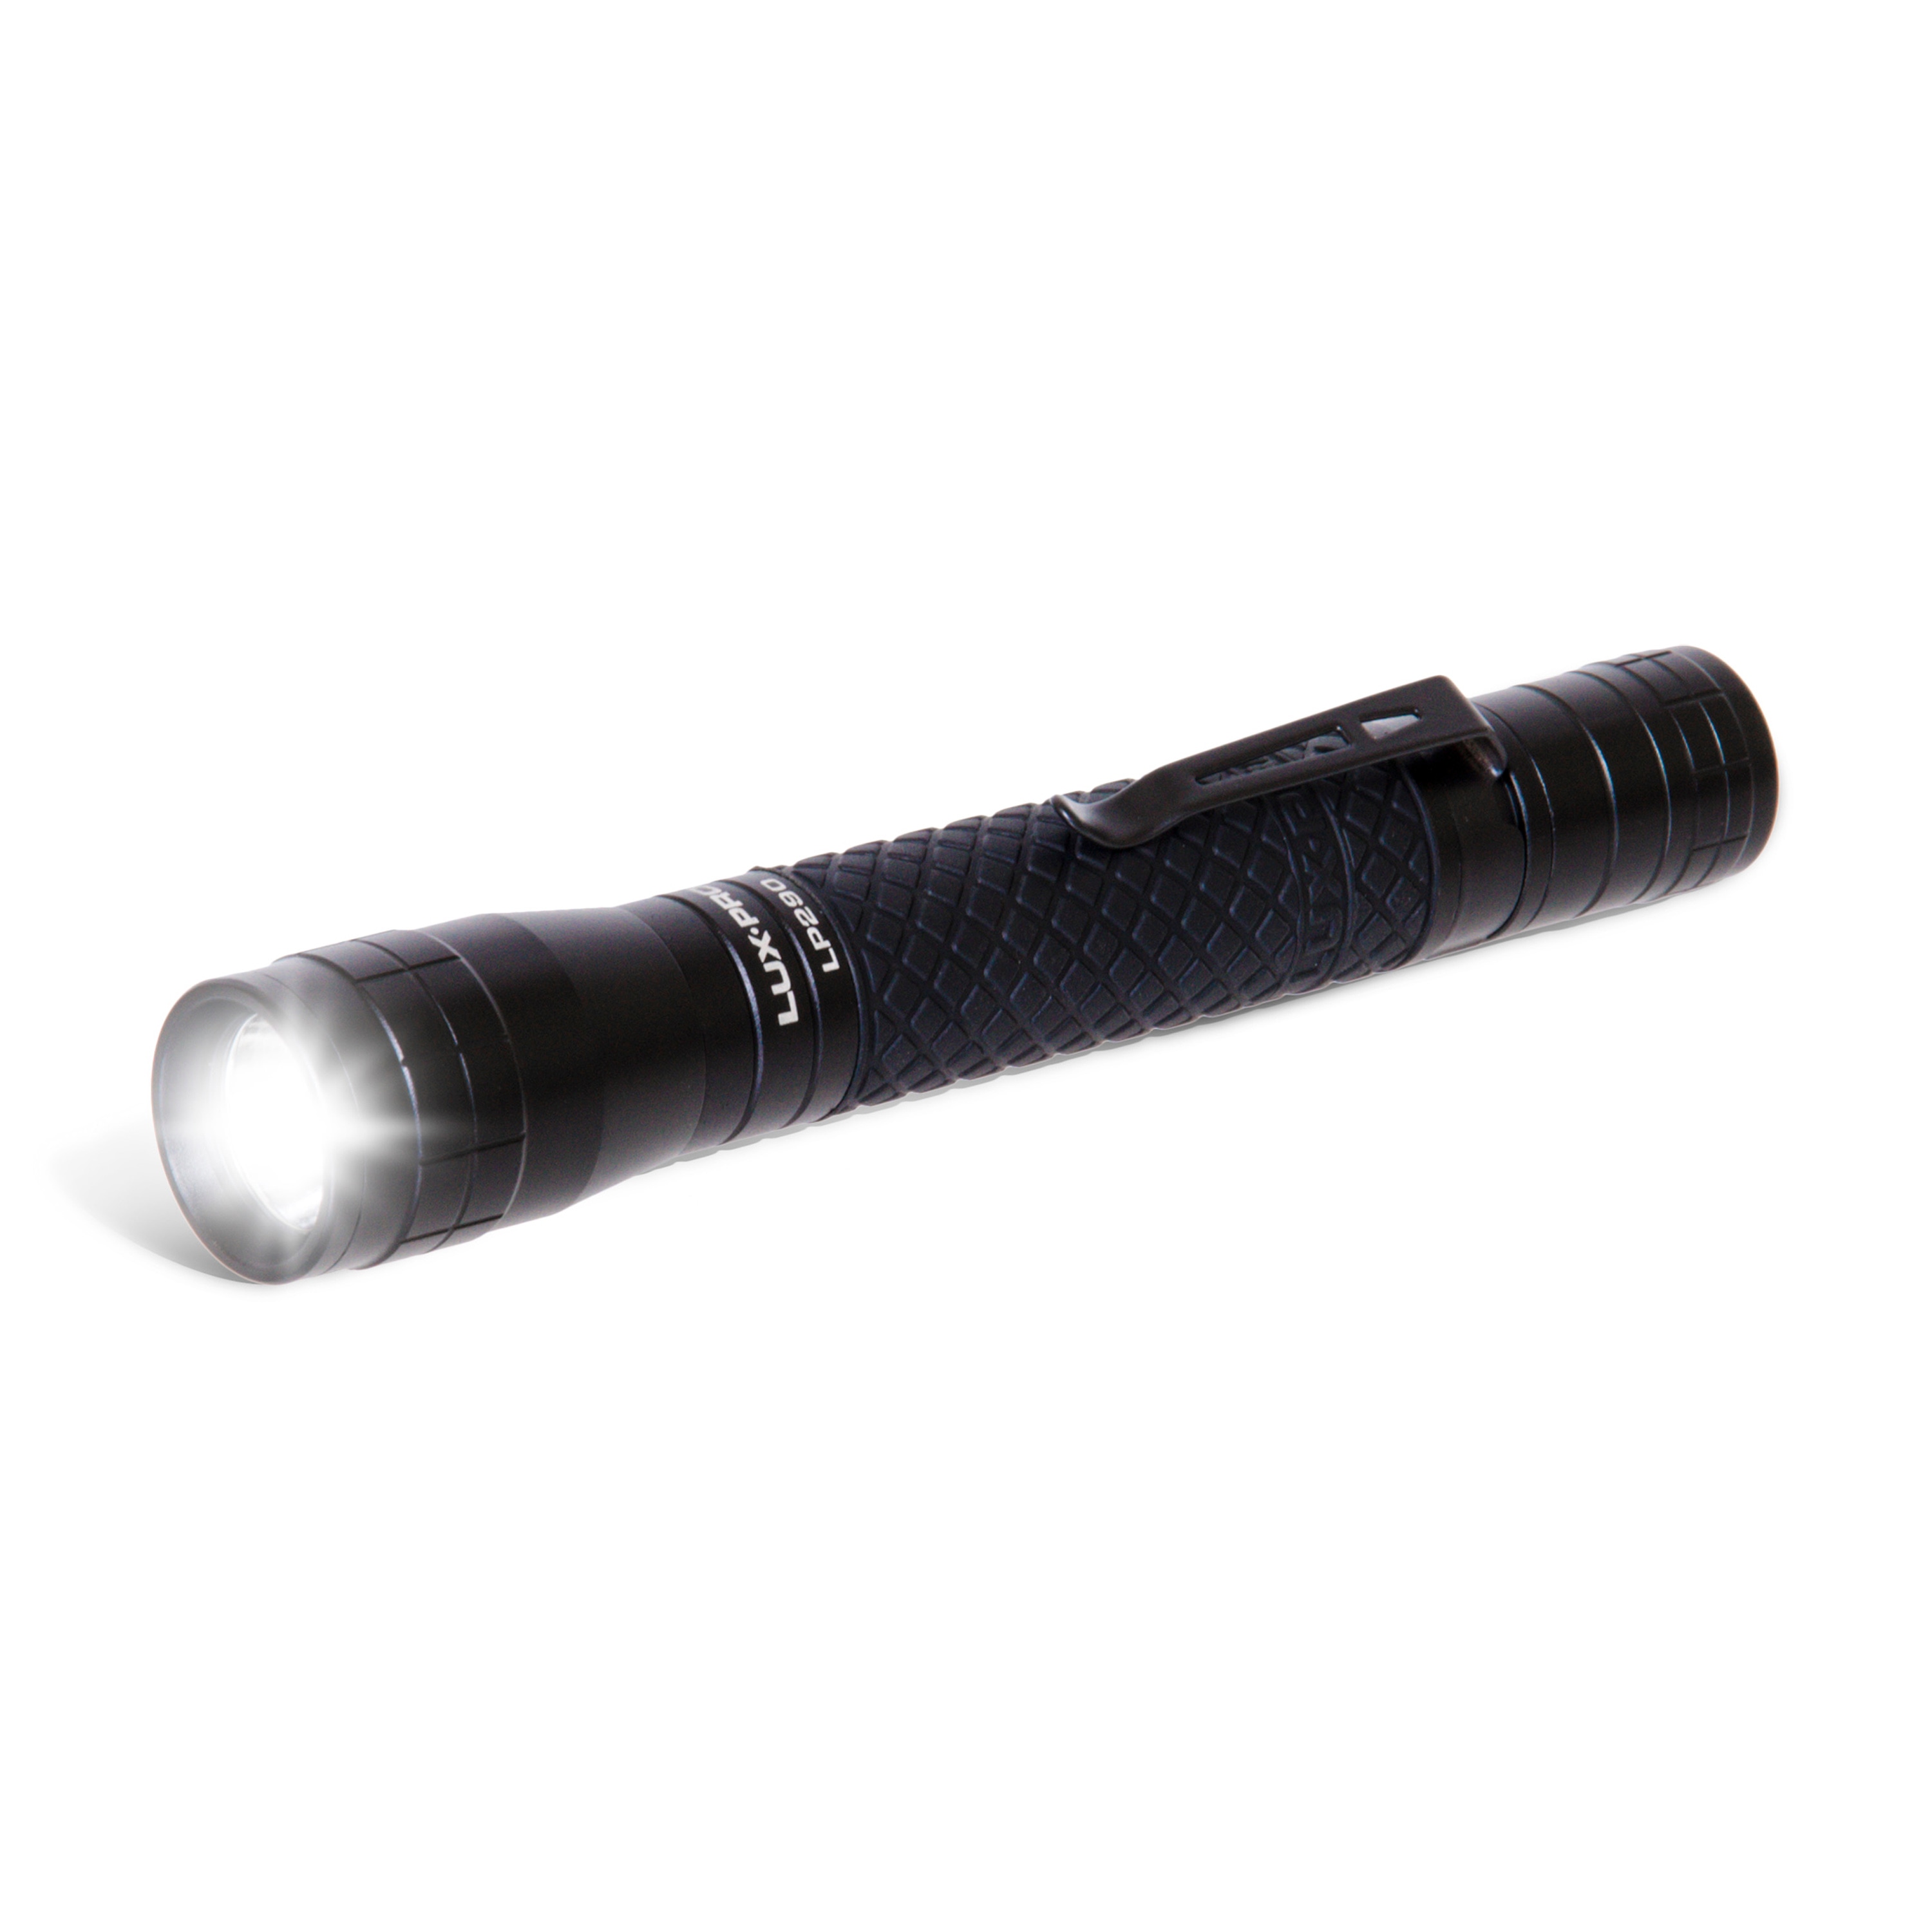 Luxpro LP290V2 Compact LED Flashlight with Pocket Clip (Black)